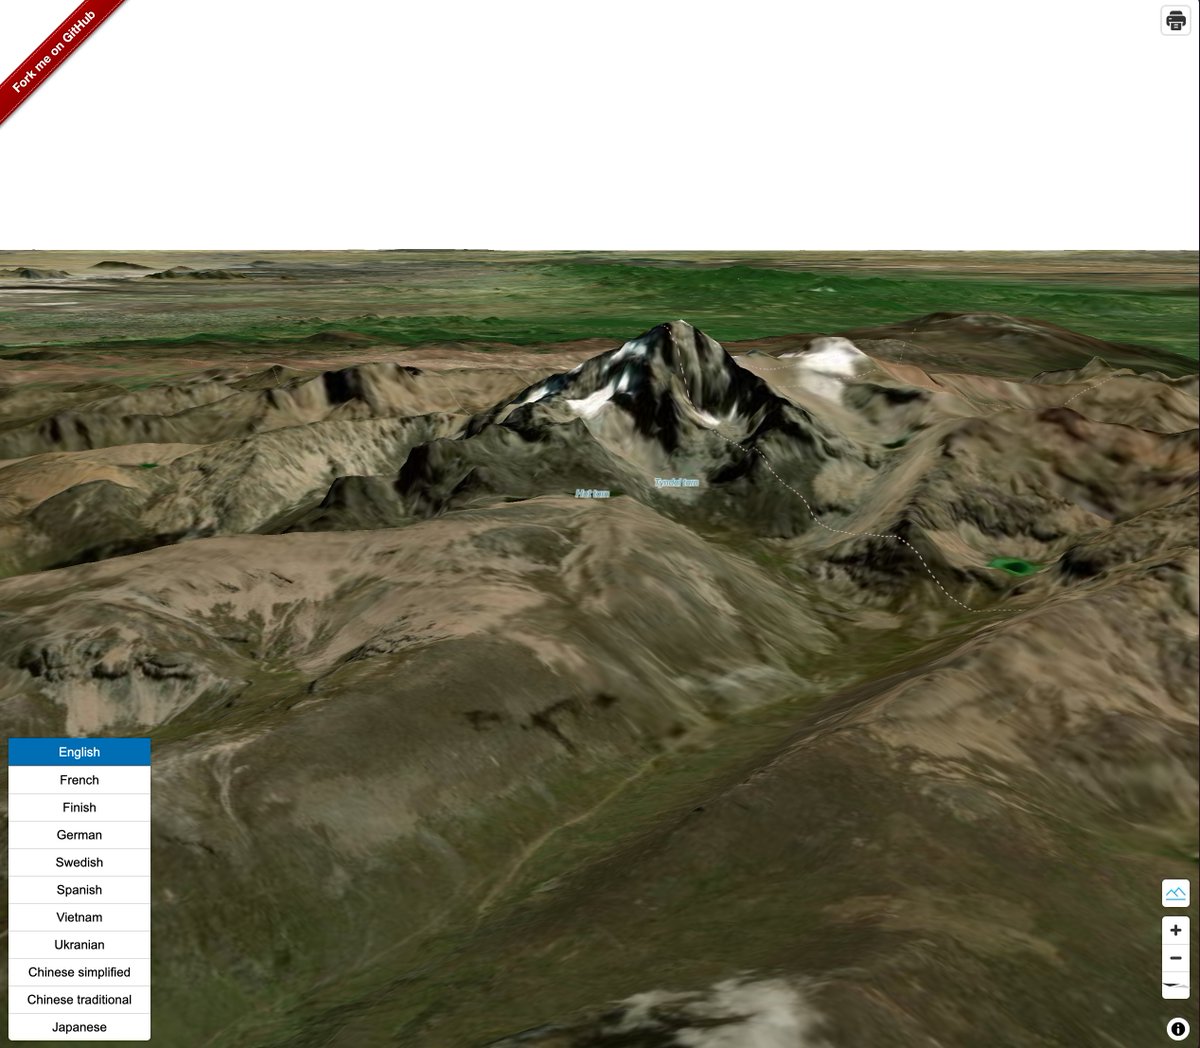 maplibre-gl-export v3.3.0 was released! Now you can export an image with #Maplibre terrain! Try the demo from the following website! I also updated the documentation website look better. maplibre-gl-export.water-gis.com